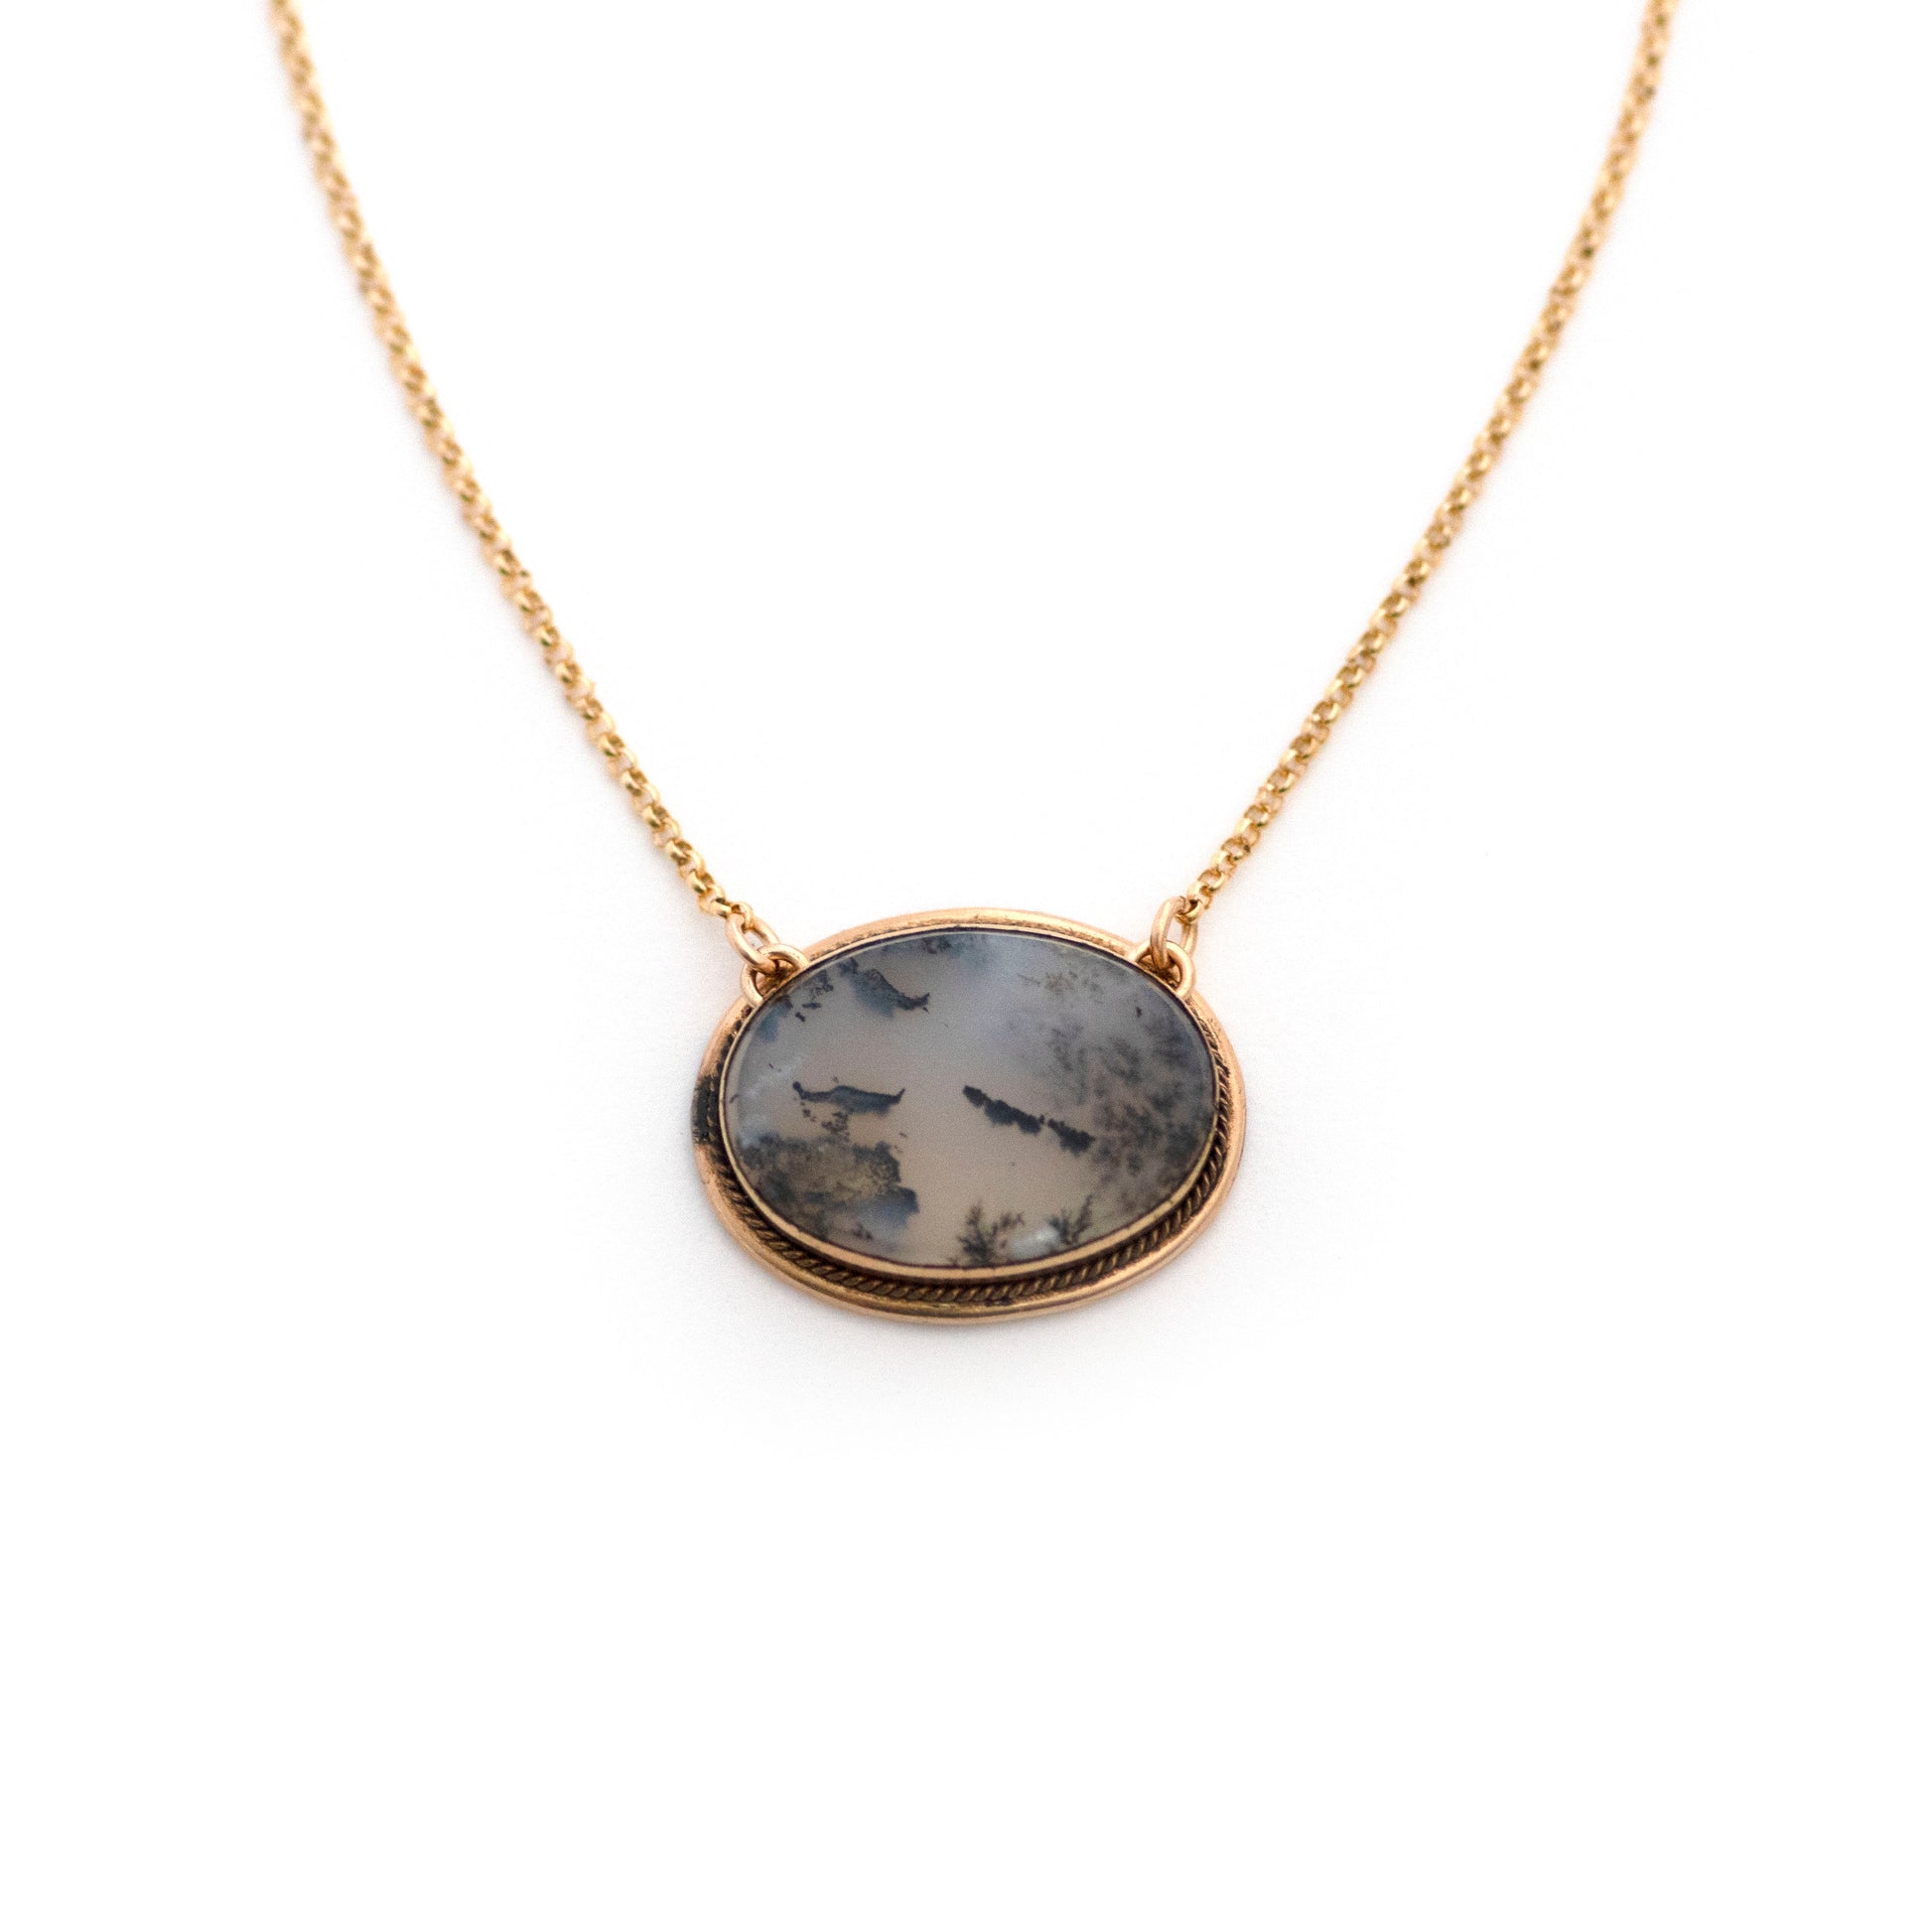 This one-of-a-kind conversion necklace is made up of:  Gold filled Victorian brooch pendant from the late 1800s with dendritic moss agate. 